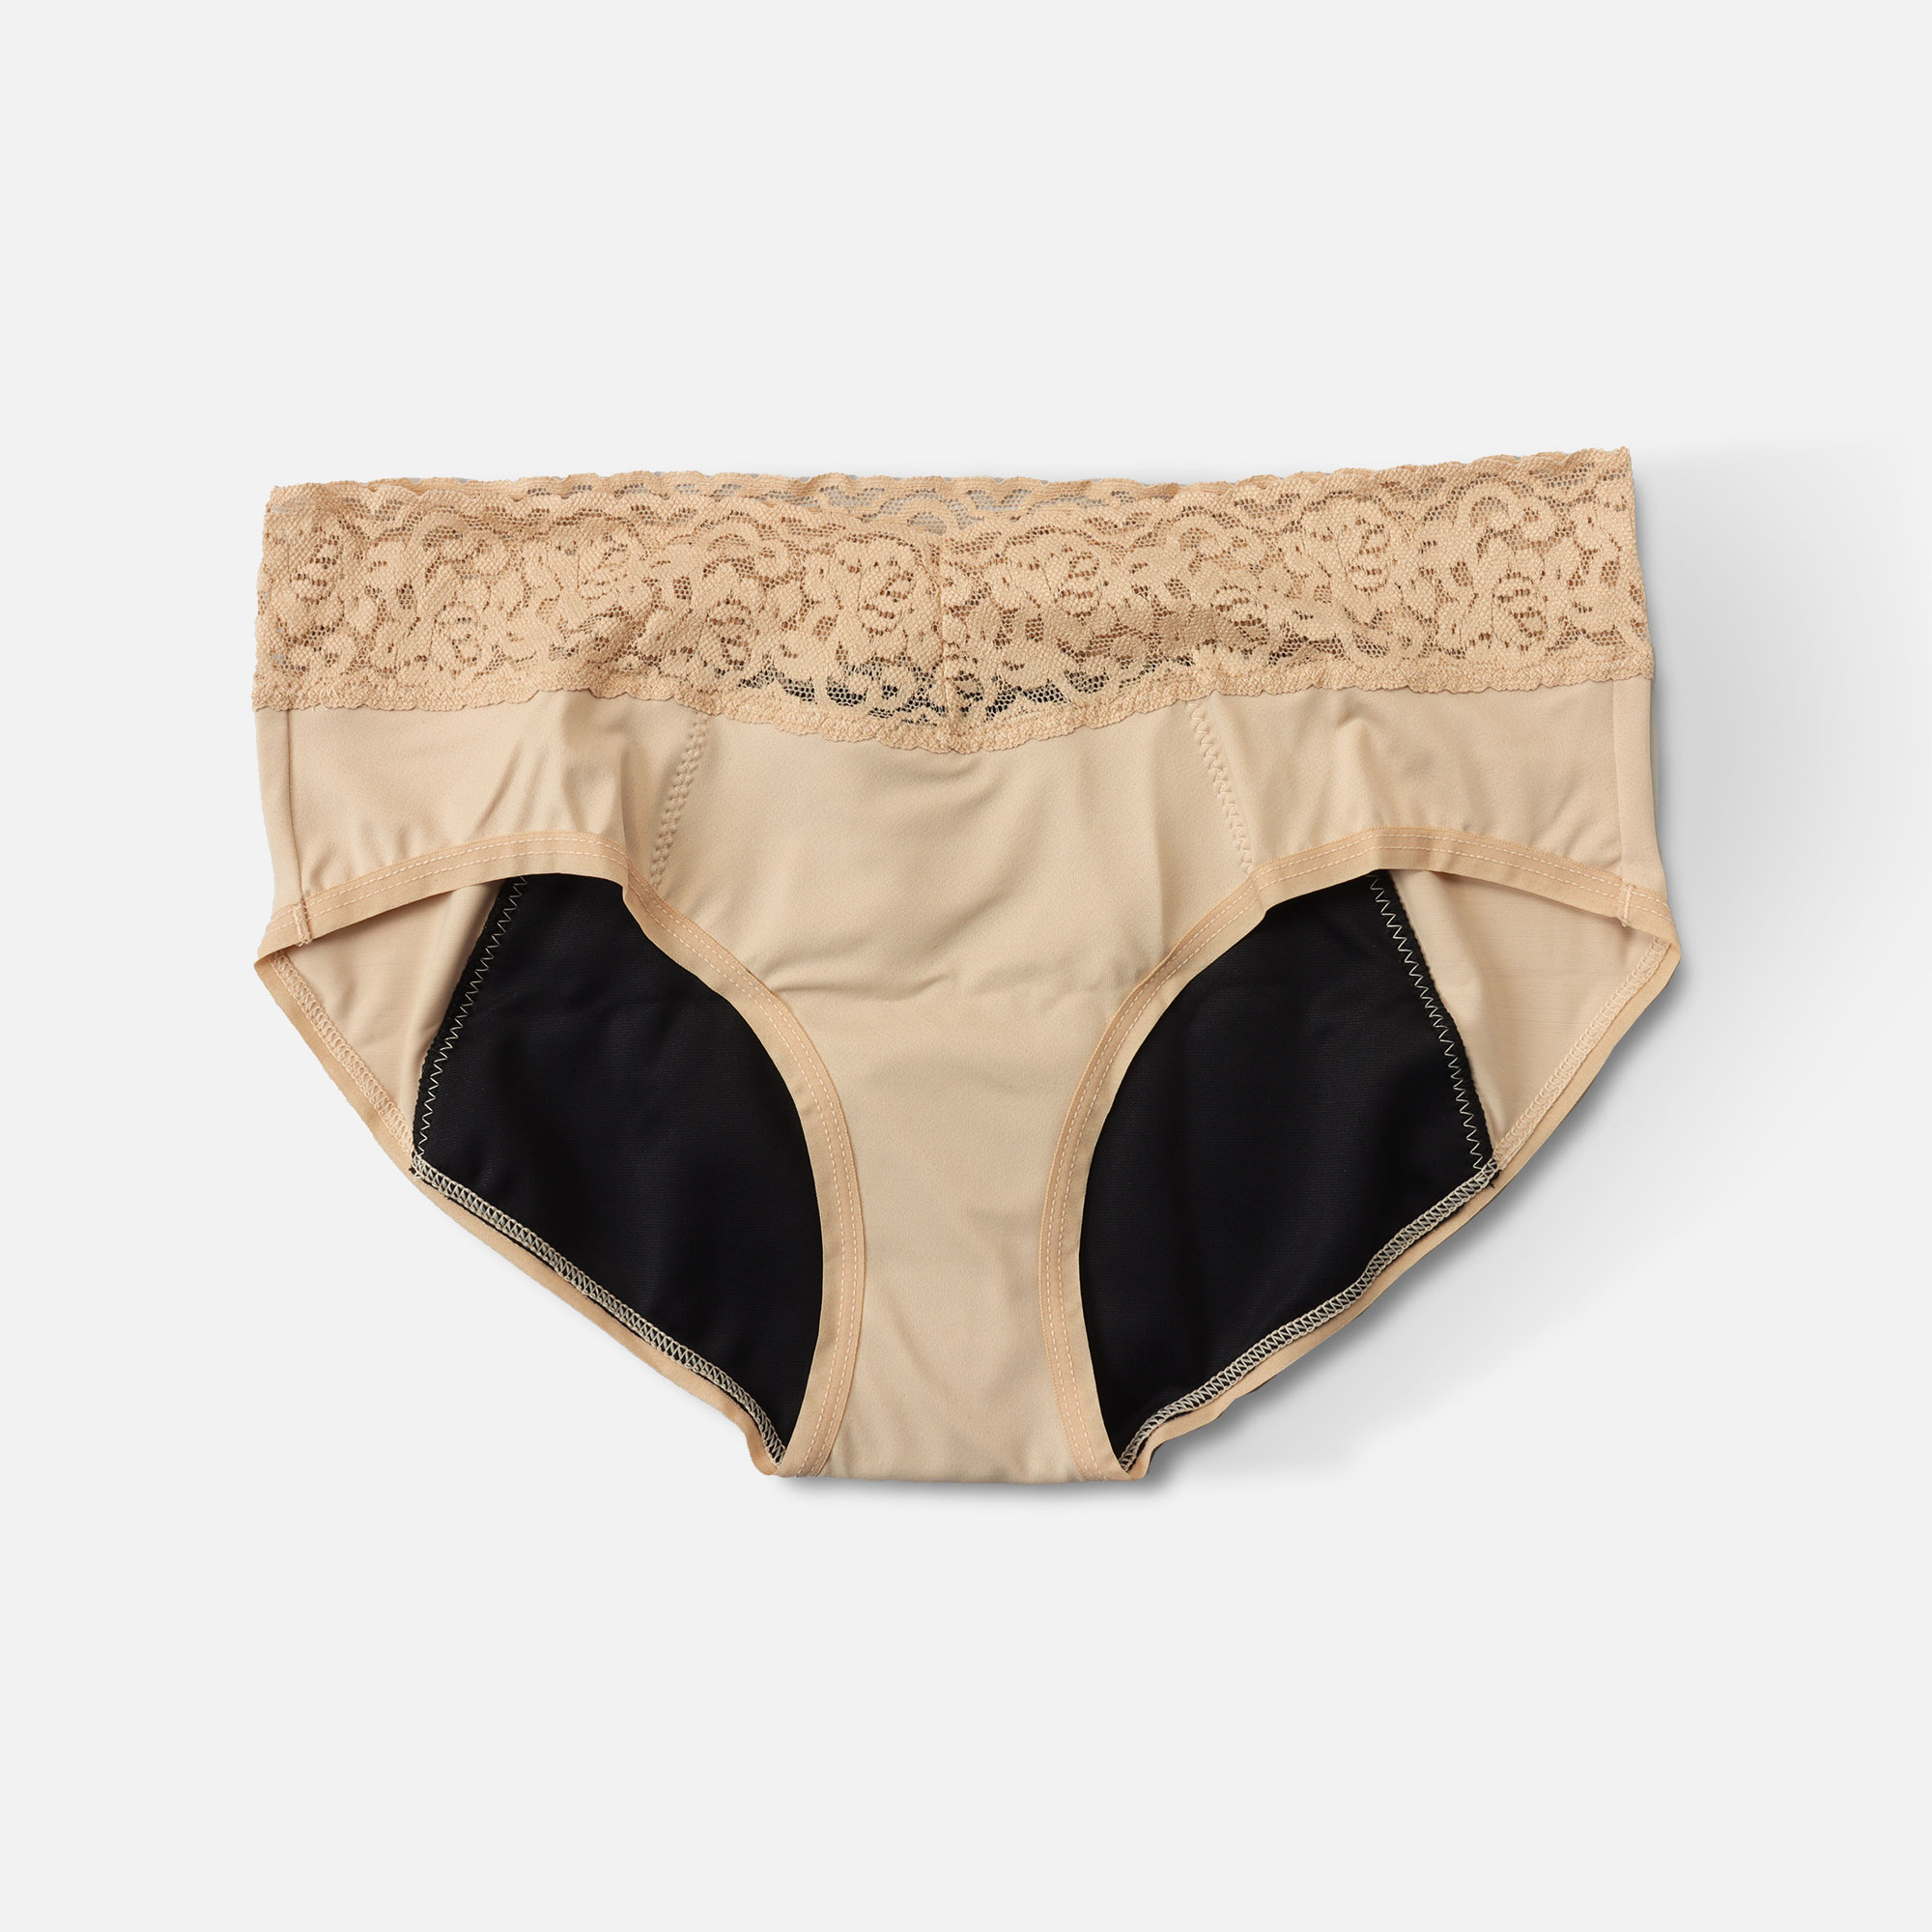 Period underwear: The alternative to tampons and pads - Vulvani